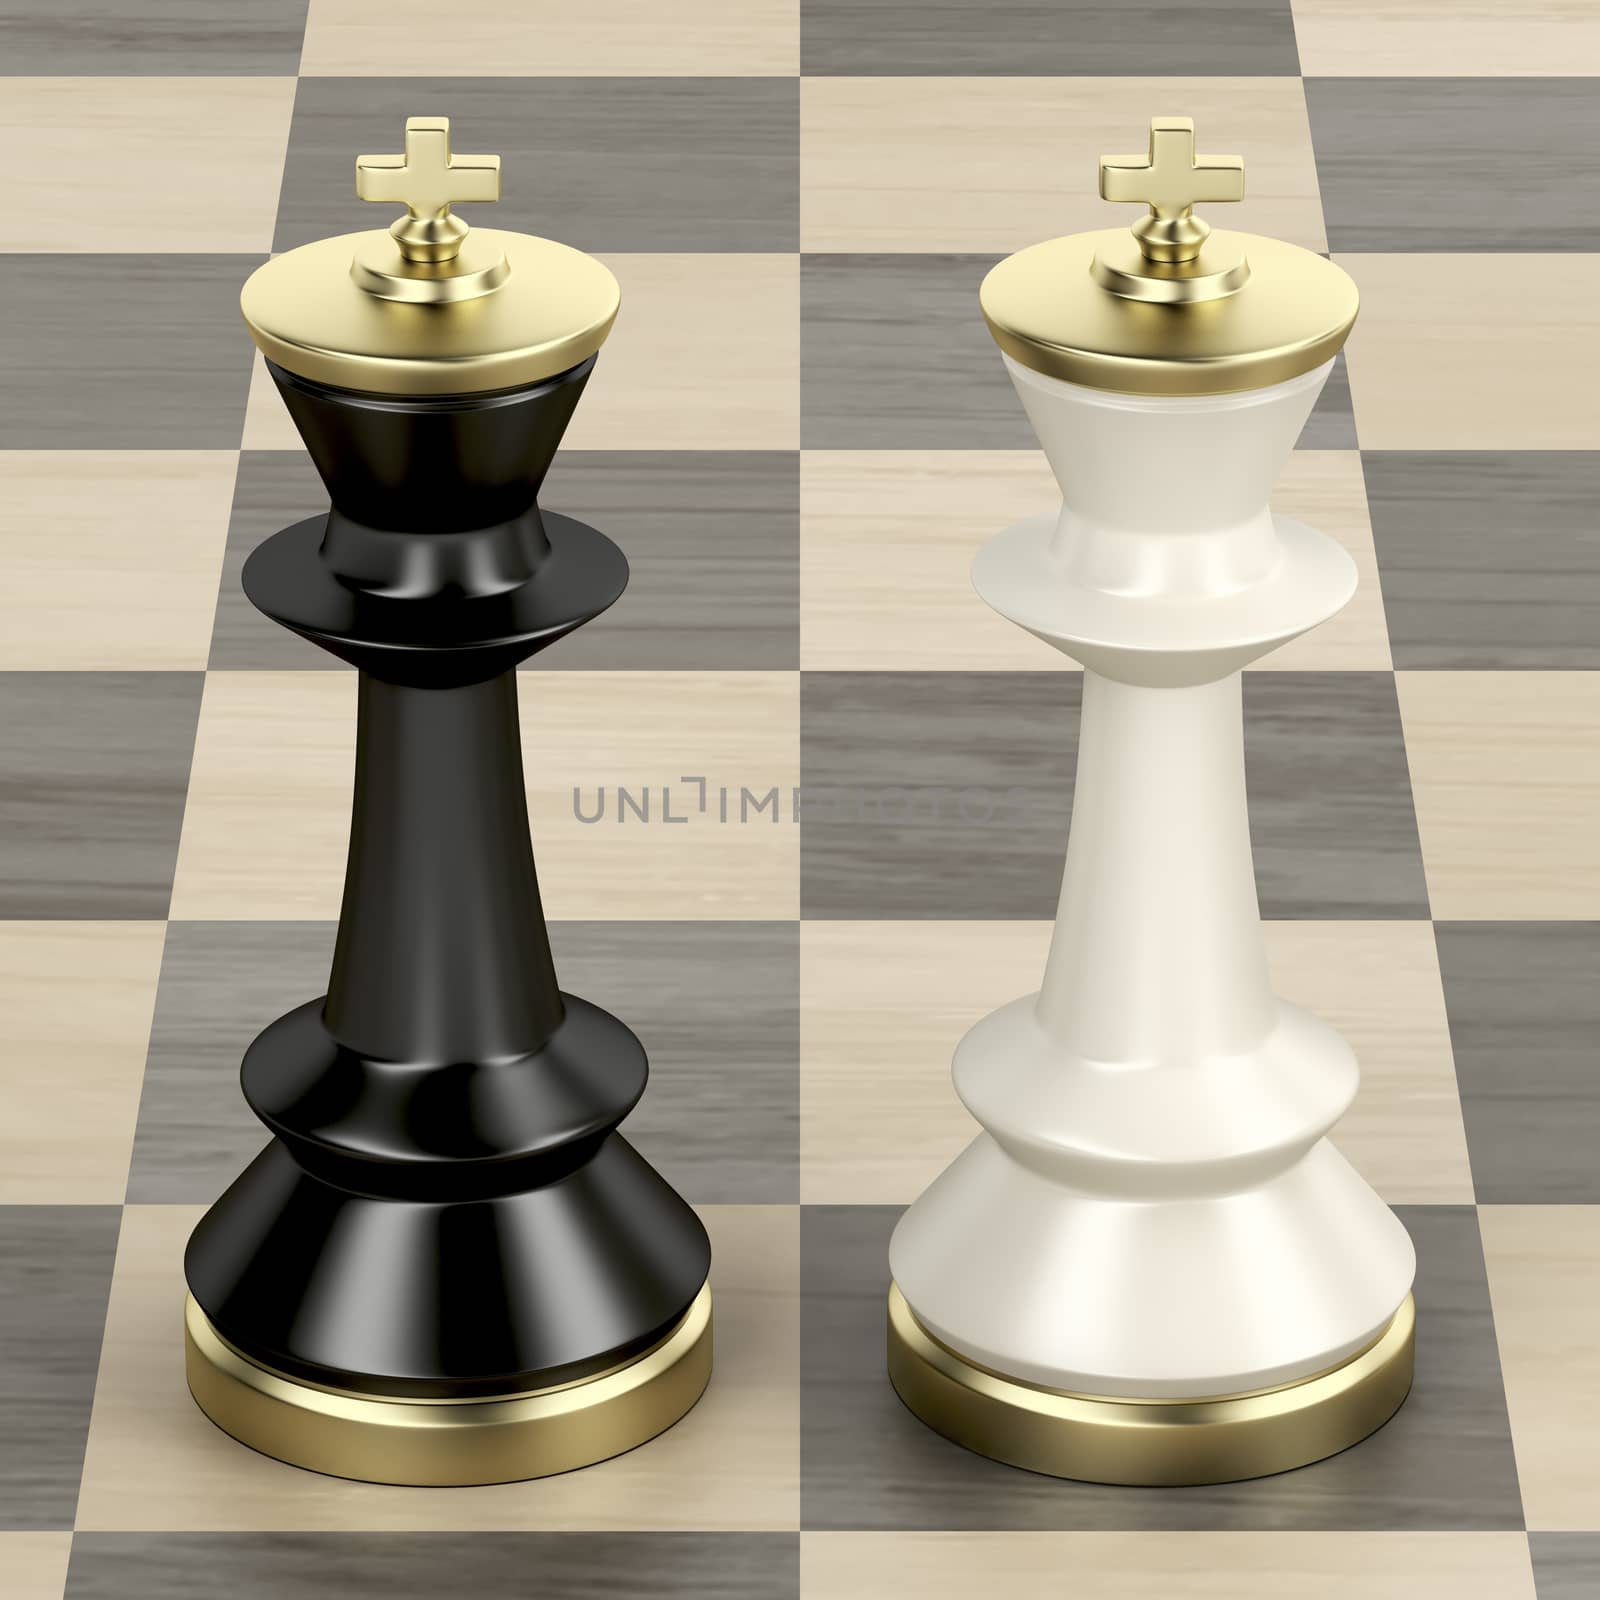 Chess kings on wooden chessboard by magraphics